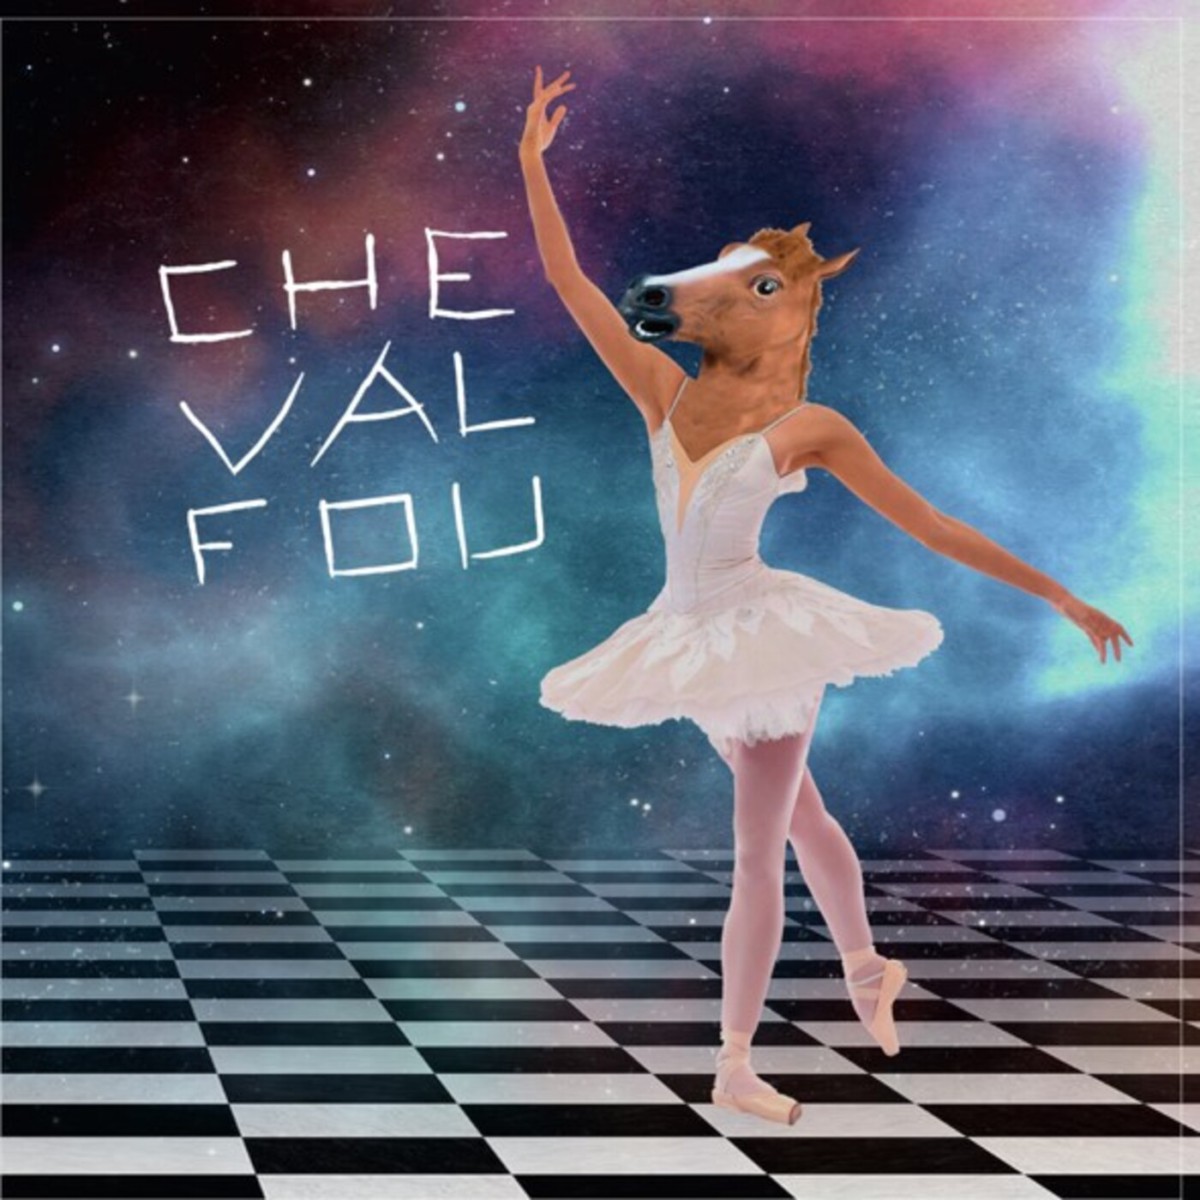 Album cover with a horse ballet dancing in a tutu on a checkerboard floor with clouds in the background and the words Cheval Fou spelled out in chalk